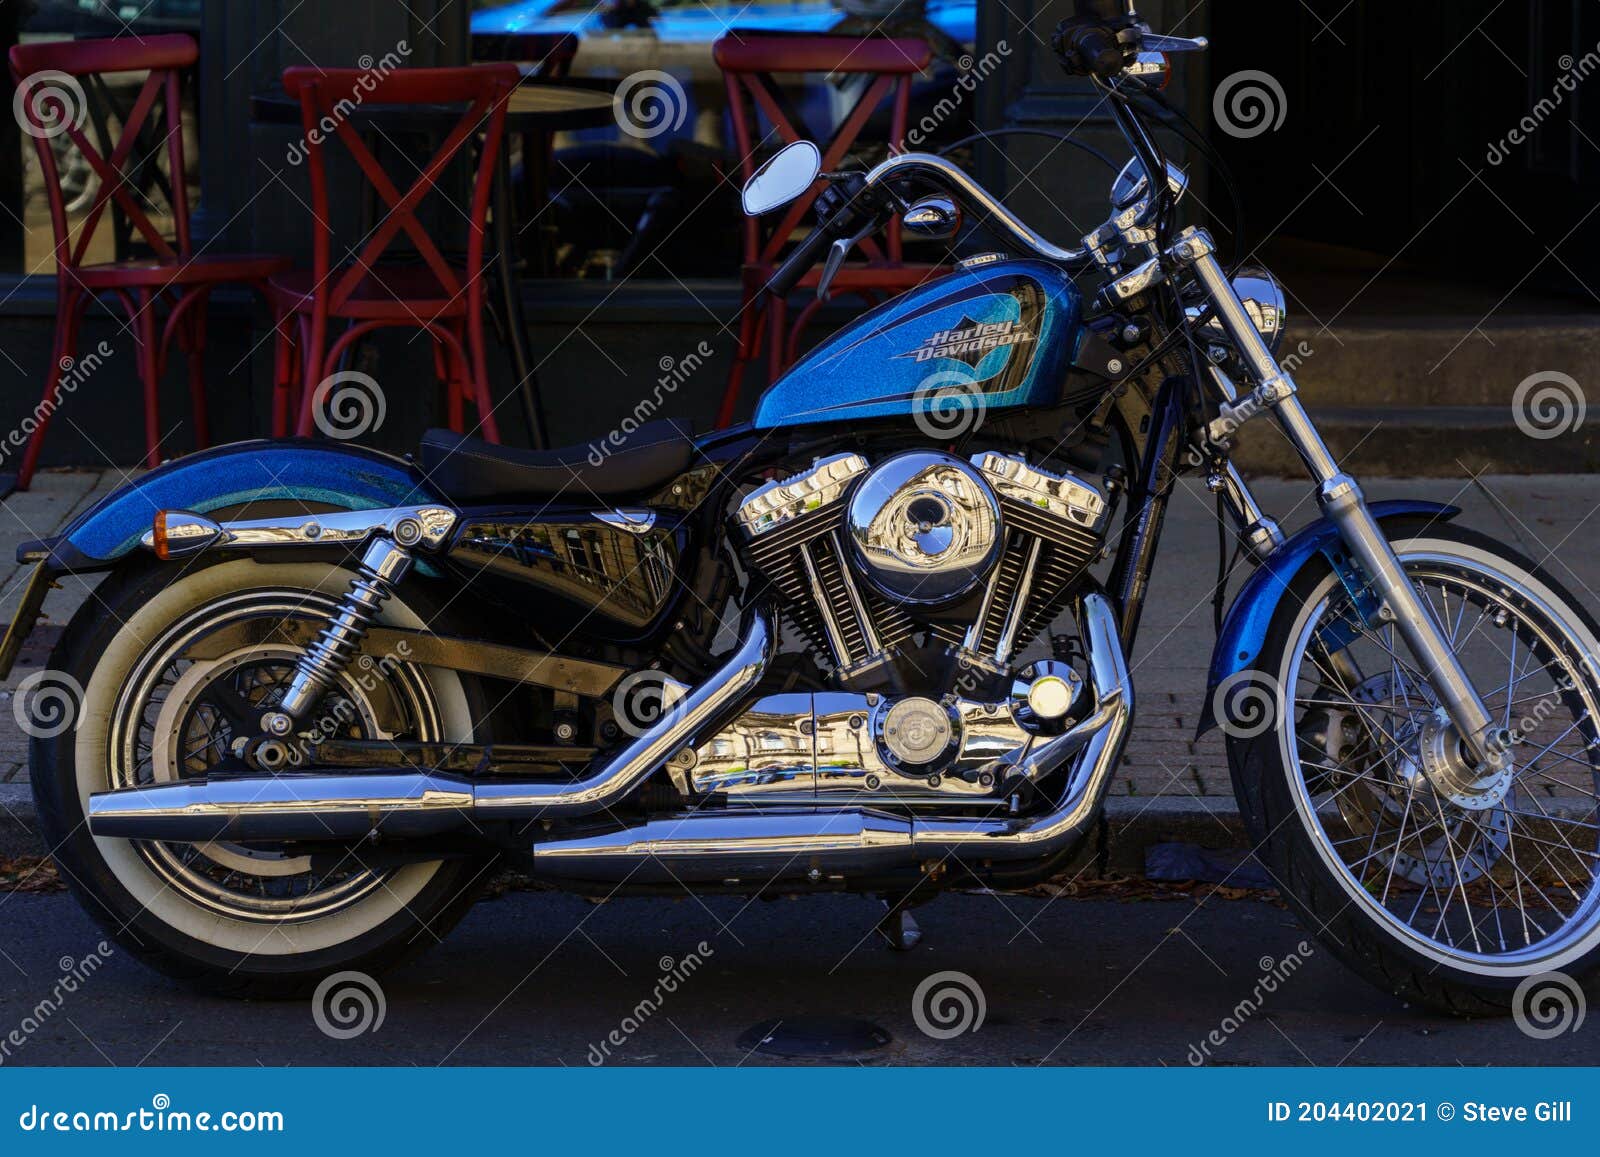 1 146 Blue Harley Photos Free Royalty Free Stock Photos From Dreamstime